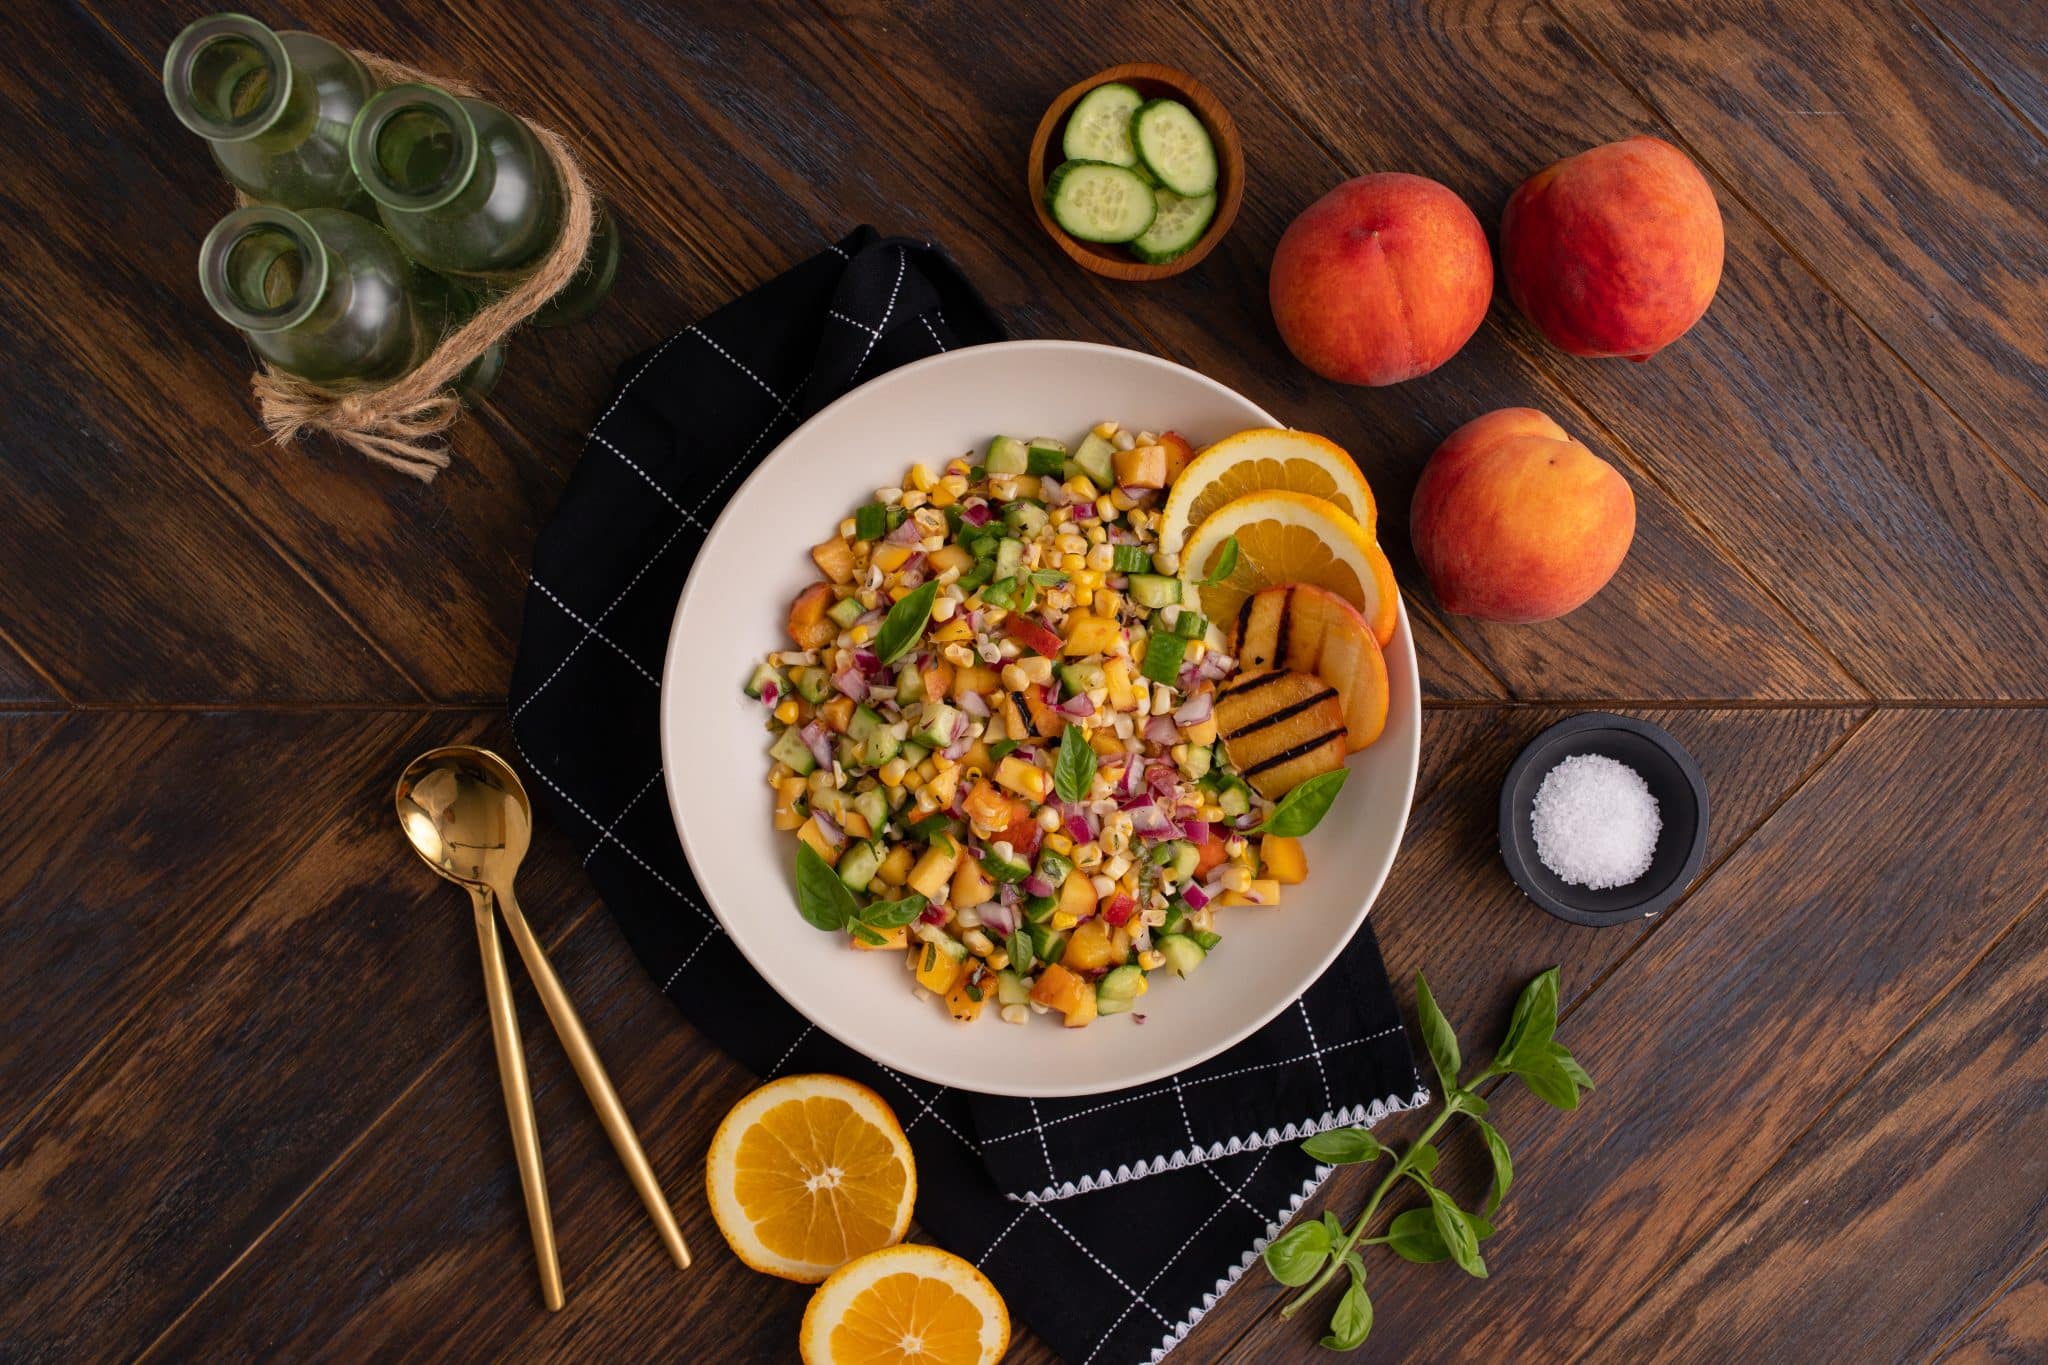 A white bowl filled with a mixed salad featuring diced vegetables, beans, and fresh peaches, accompanied by sliced oranges, cucumbers, whole peaches, gold cutlery, and a black napkin on a wooden table.